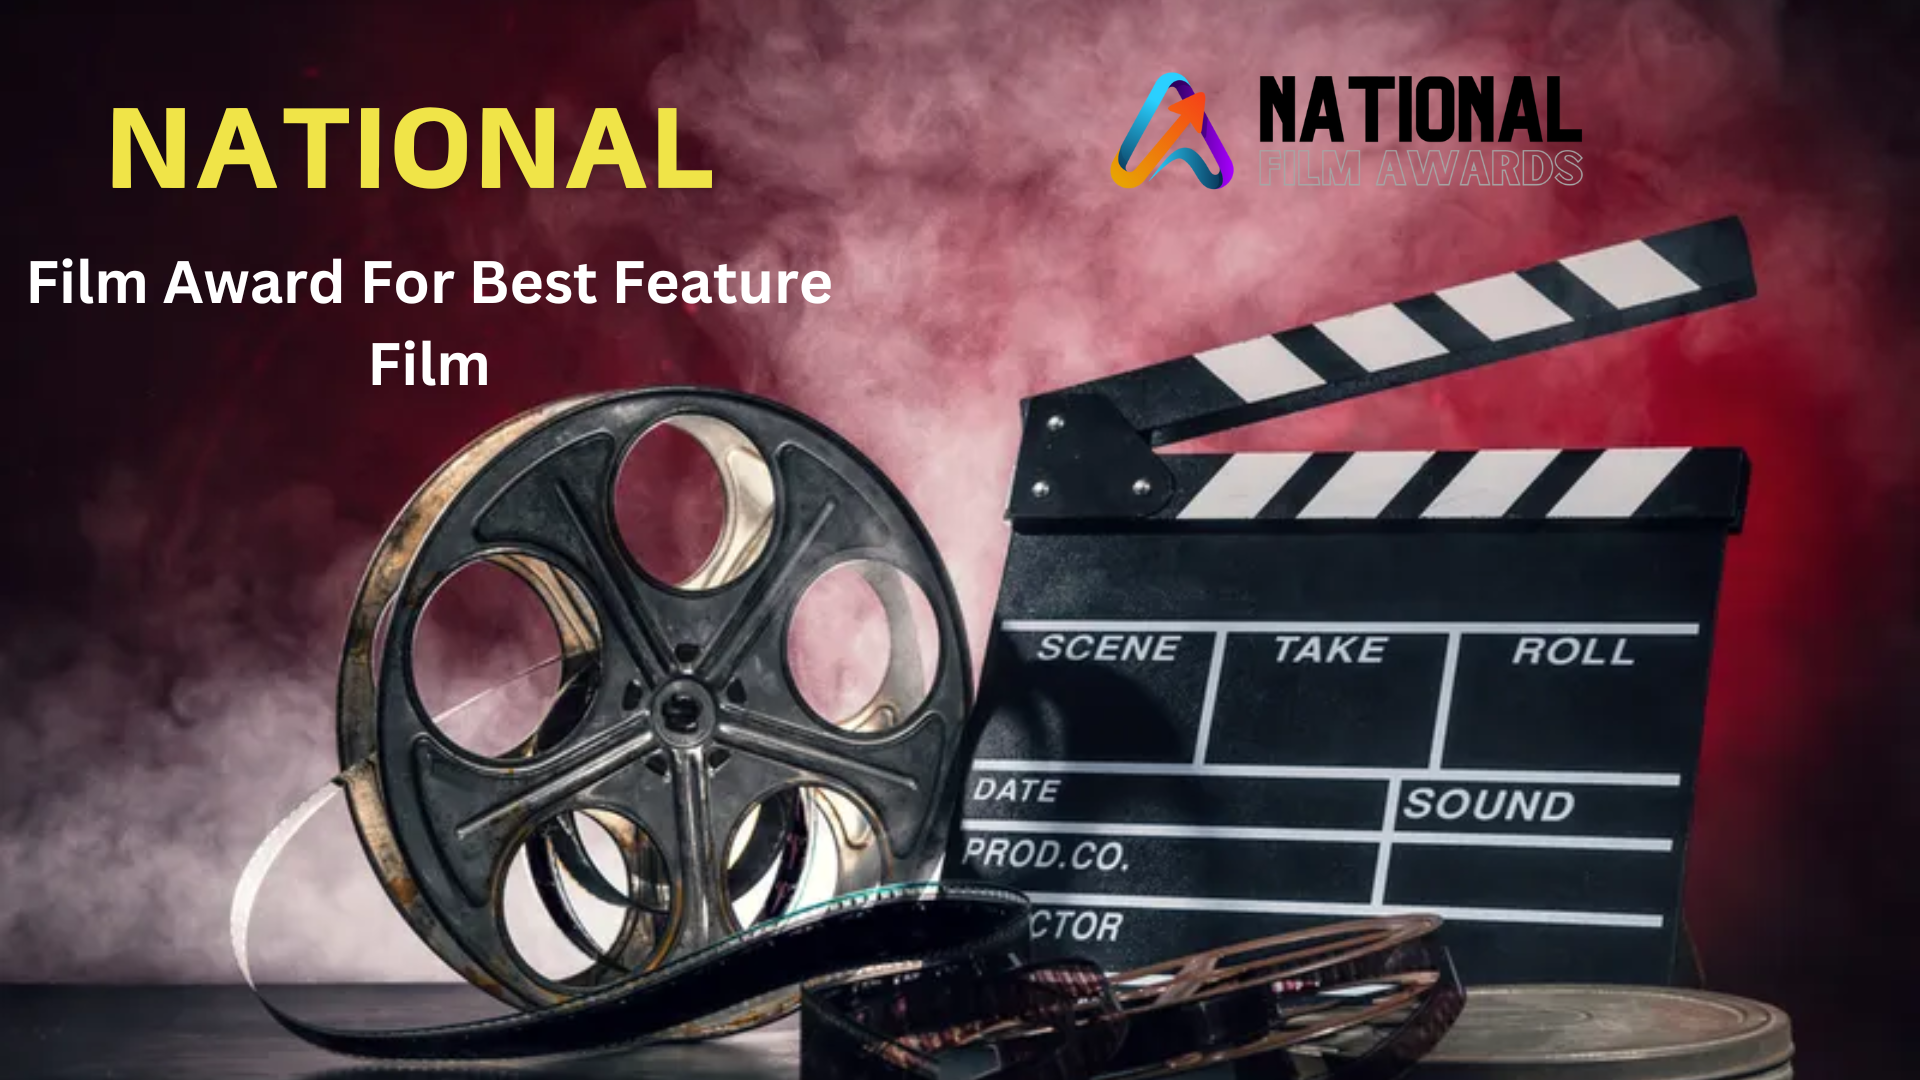 National Film Awards: Best Feature Film, Complete List of films from 1953-2021